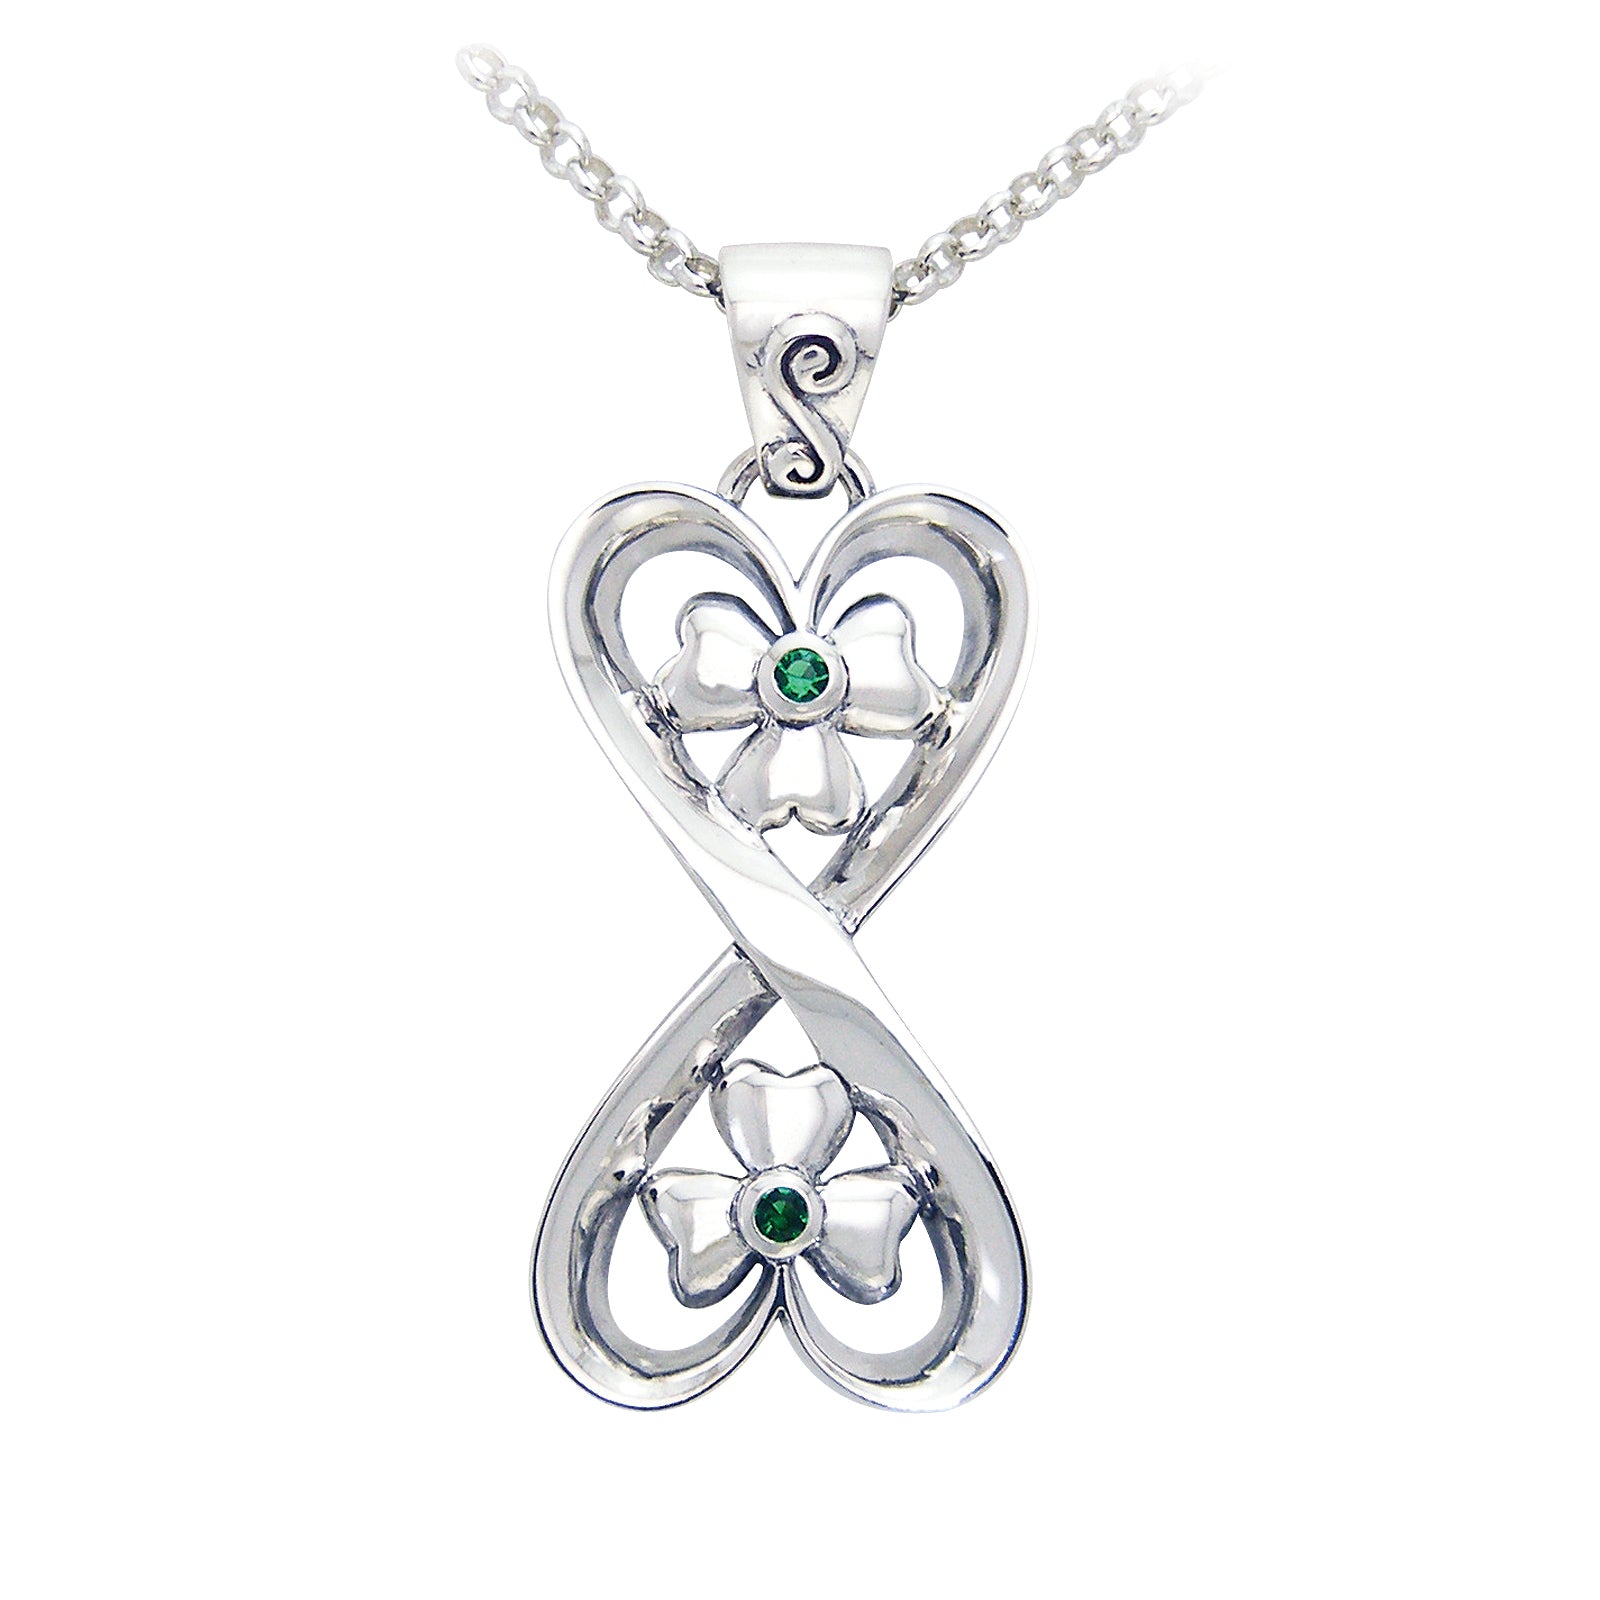 Connected Hearts - Spirit of Danu Shamrock Pendant Sterling Silver 18" Necklace - Silver Insanity